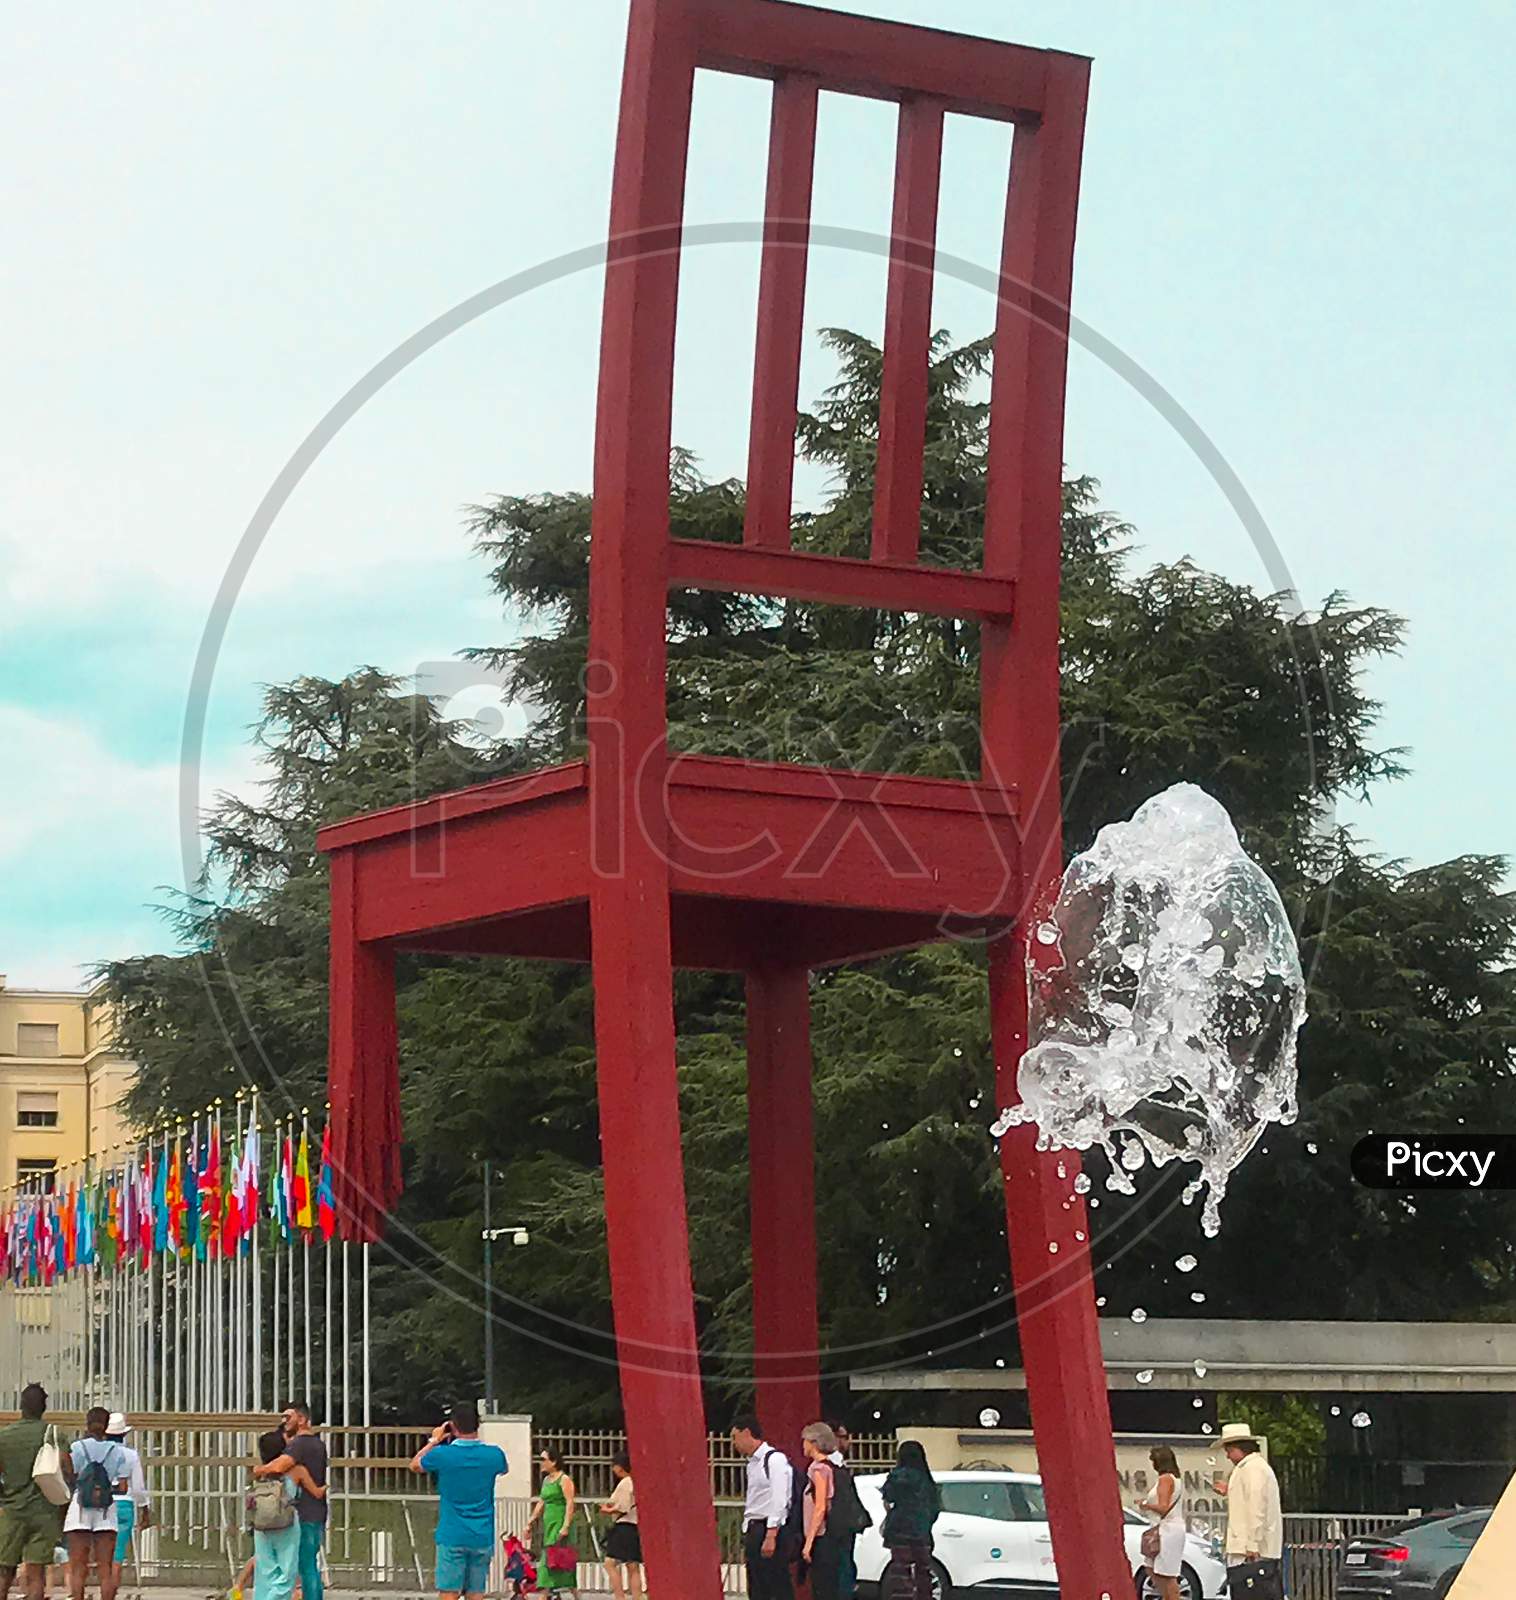 The Broken Chair at Geneva. it symbolise opposition to land mines and cluster bombs, and acts as a reminder to politicians and others others visiting .